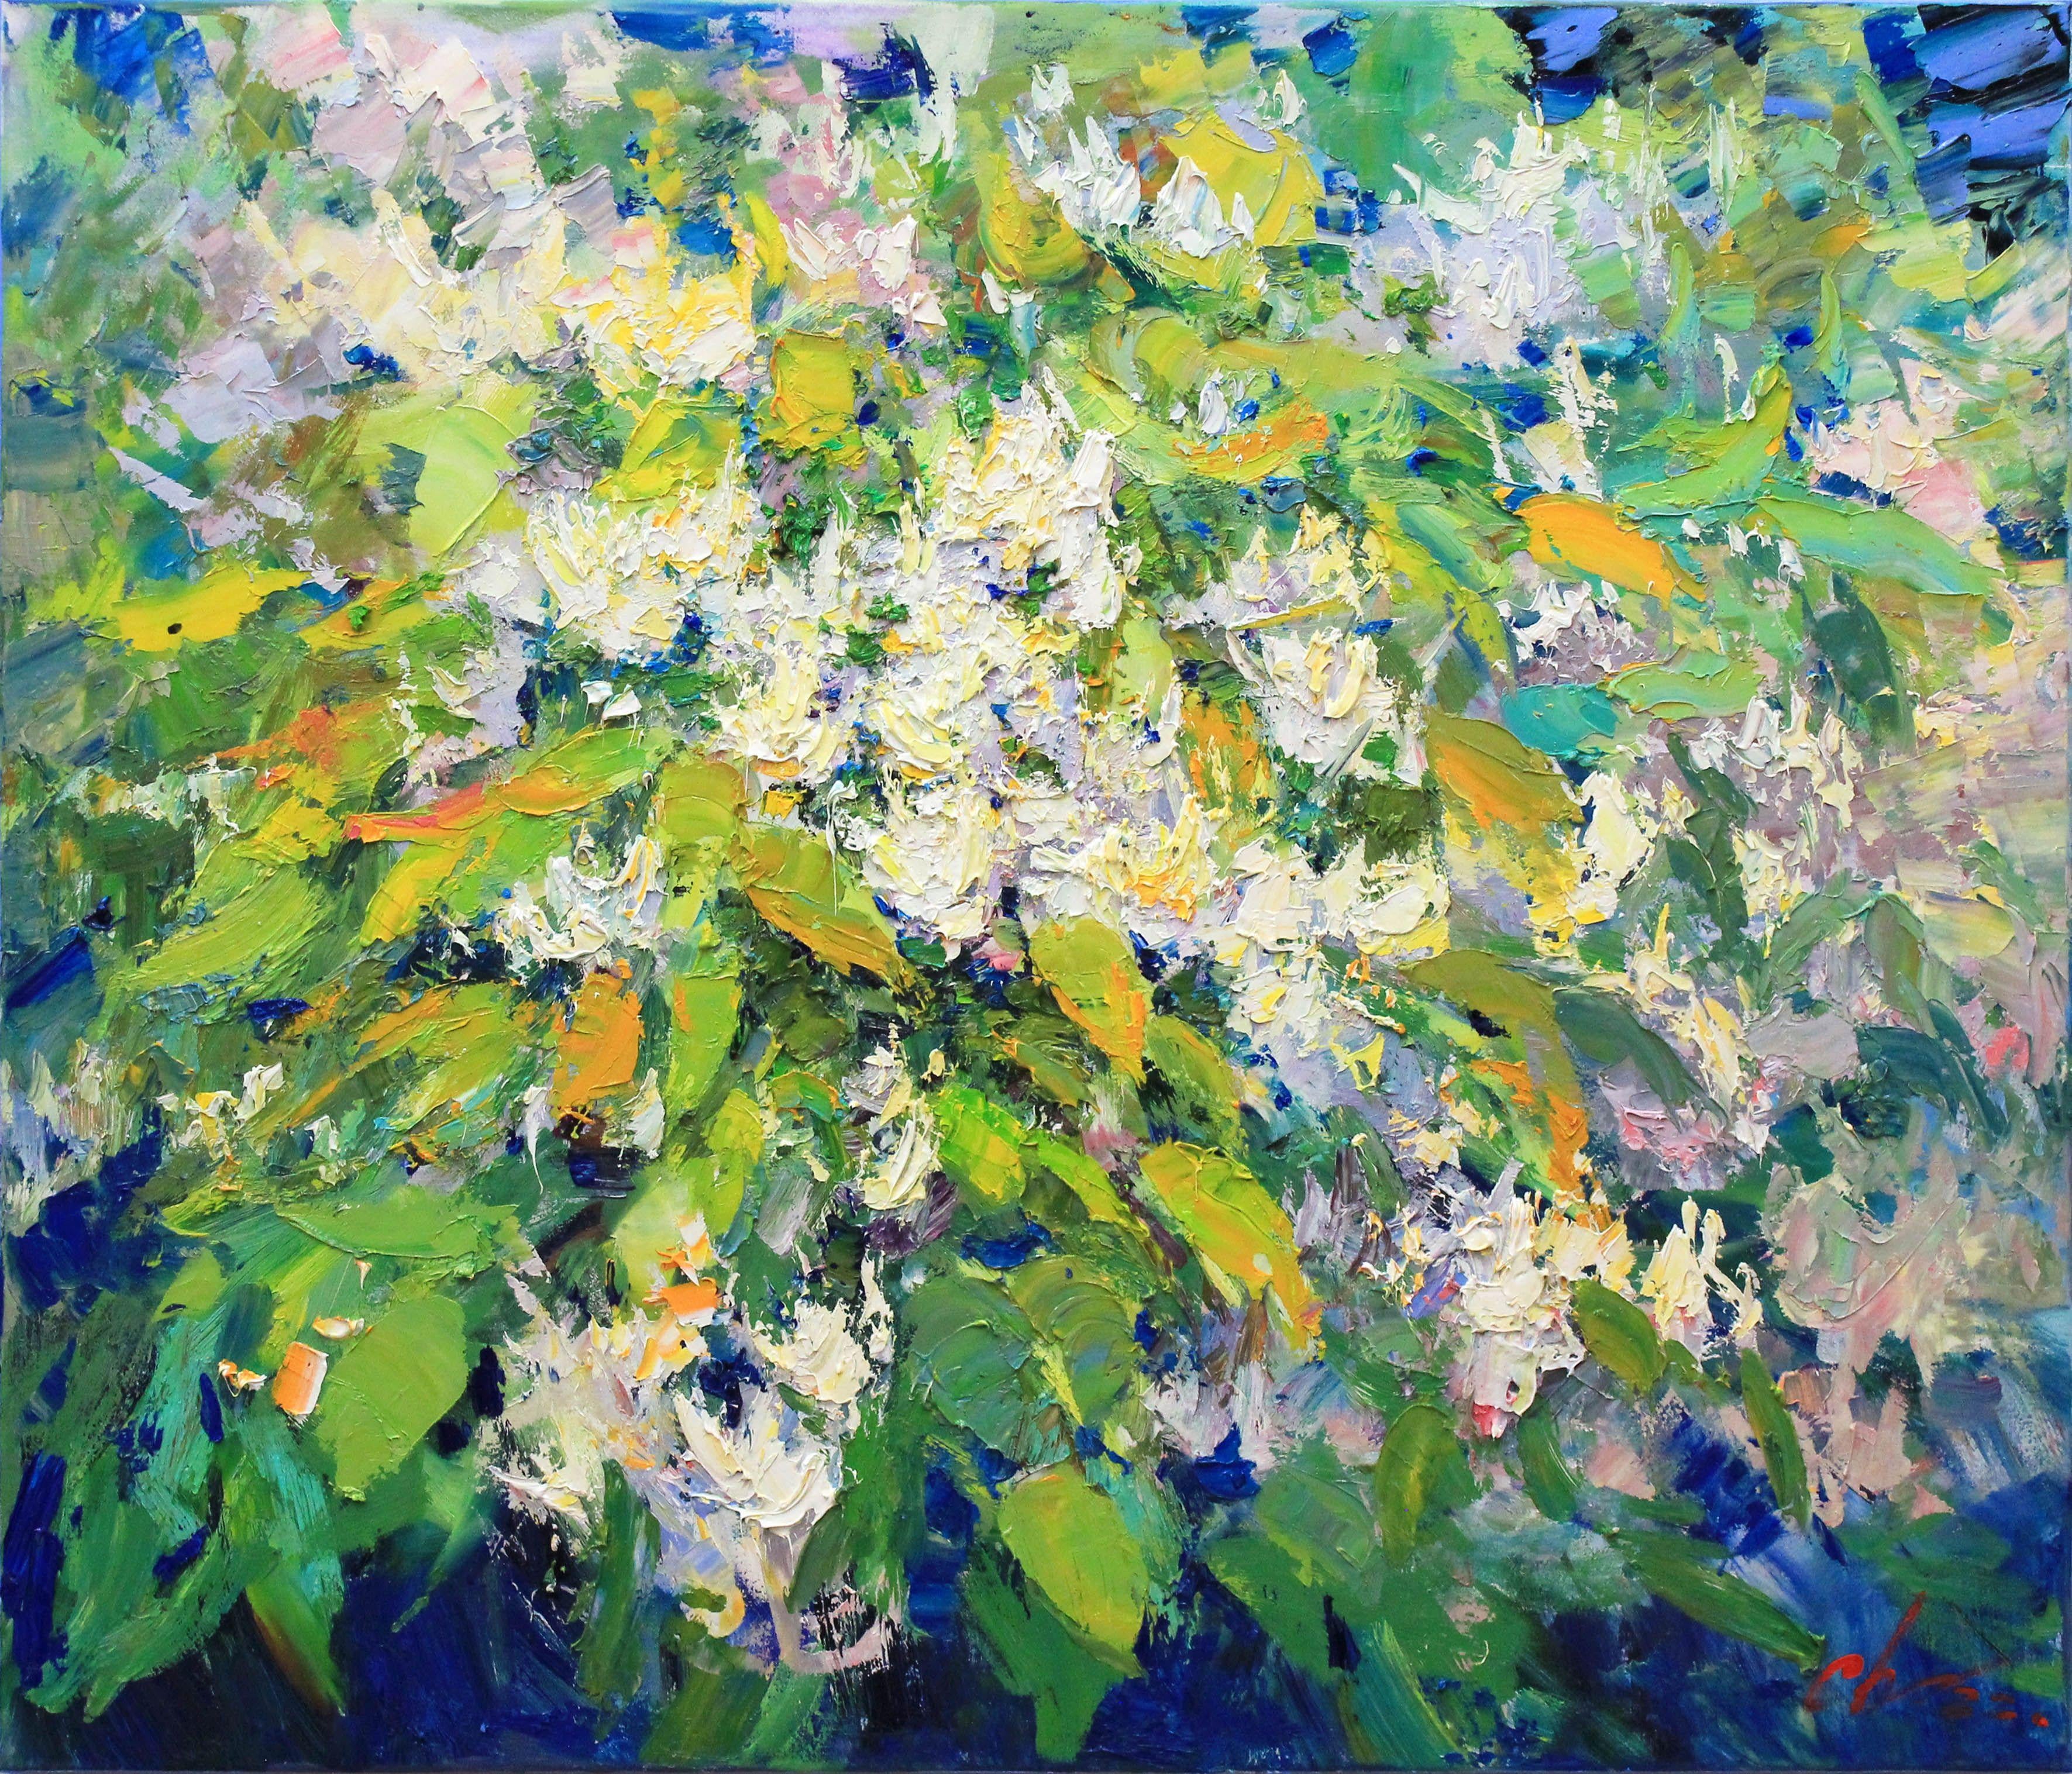 Oil painting with flowering quince, written in the style of impressionism art, realism art, expressionism art. Green, blue, yellow, white colors were used to create the picture. A painting with flowers also symbolizes prosperity, harmony in